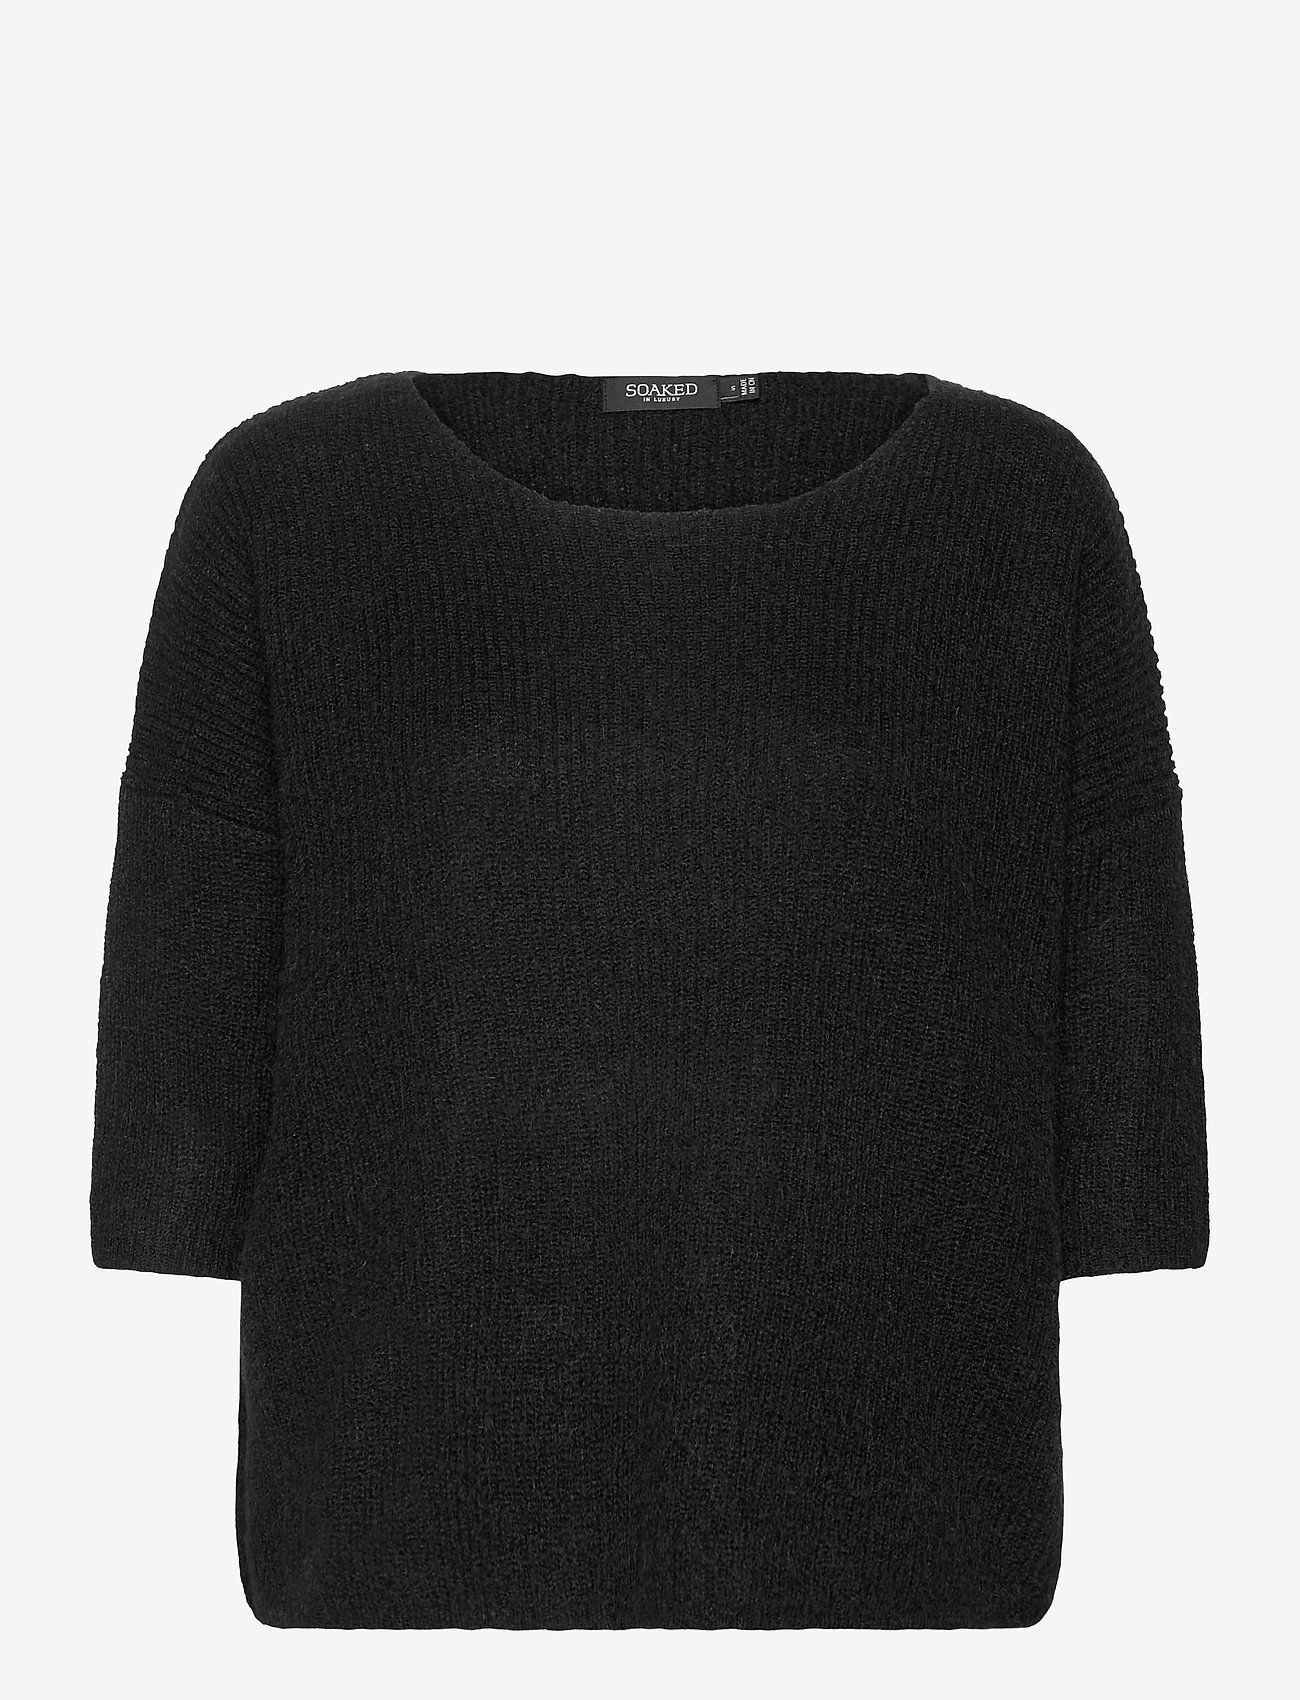 Soaked in Luxury - SLTuesday Jumper - pullover - black - 0